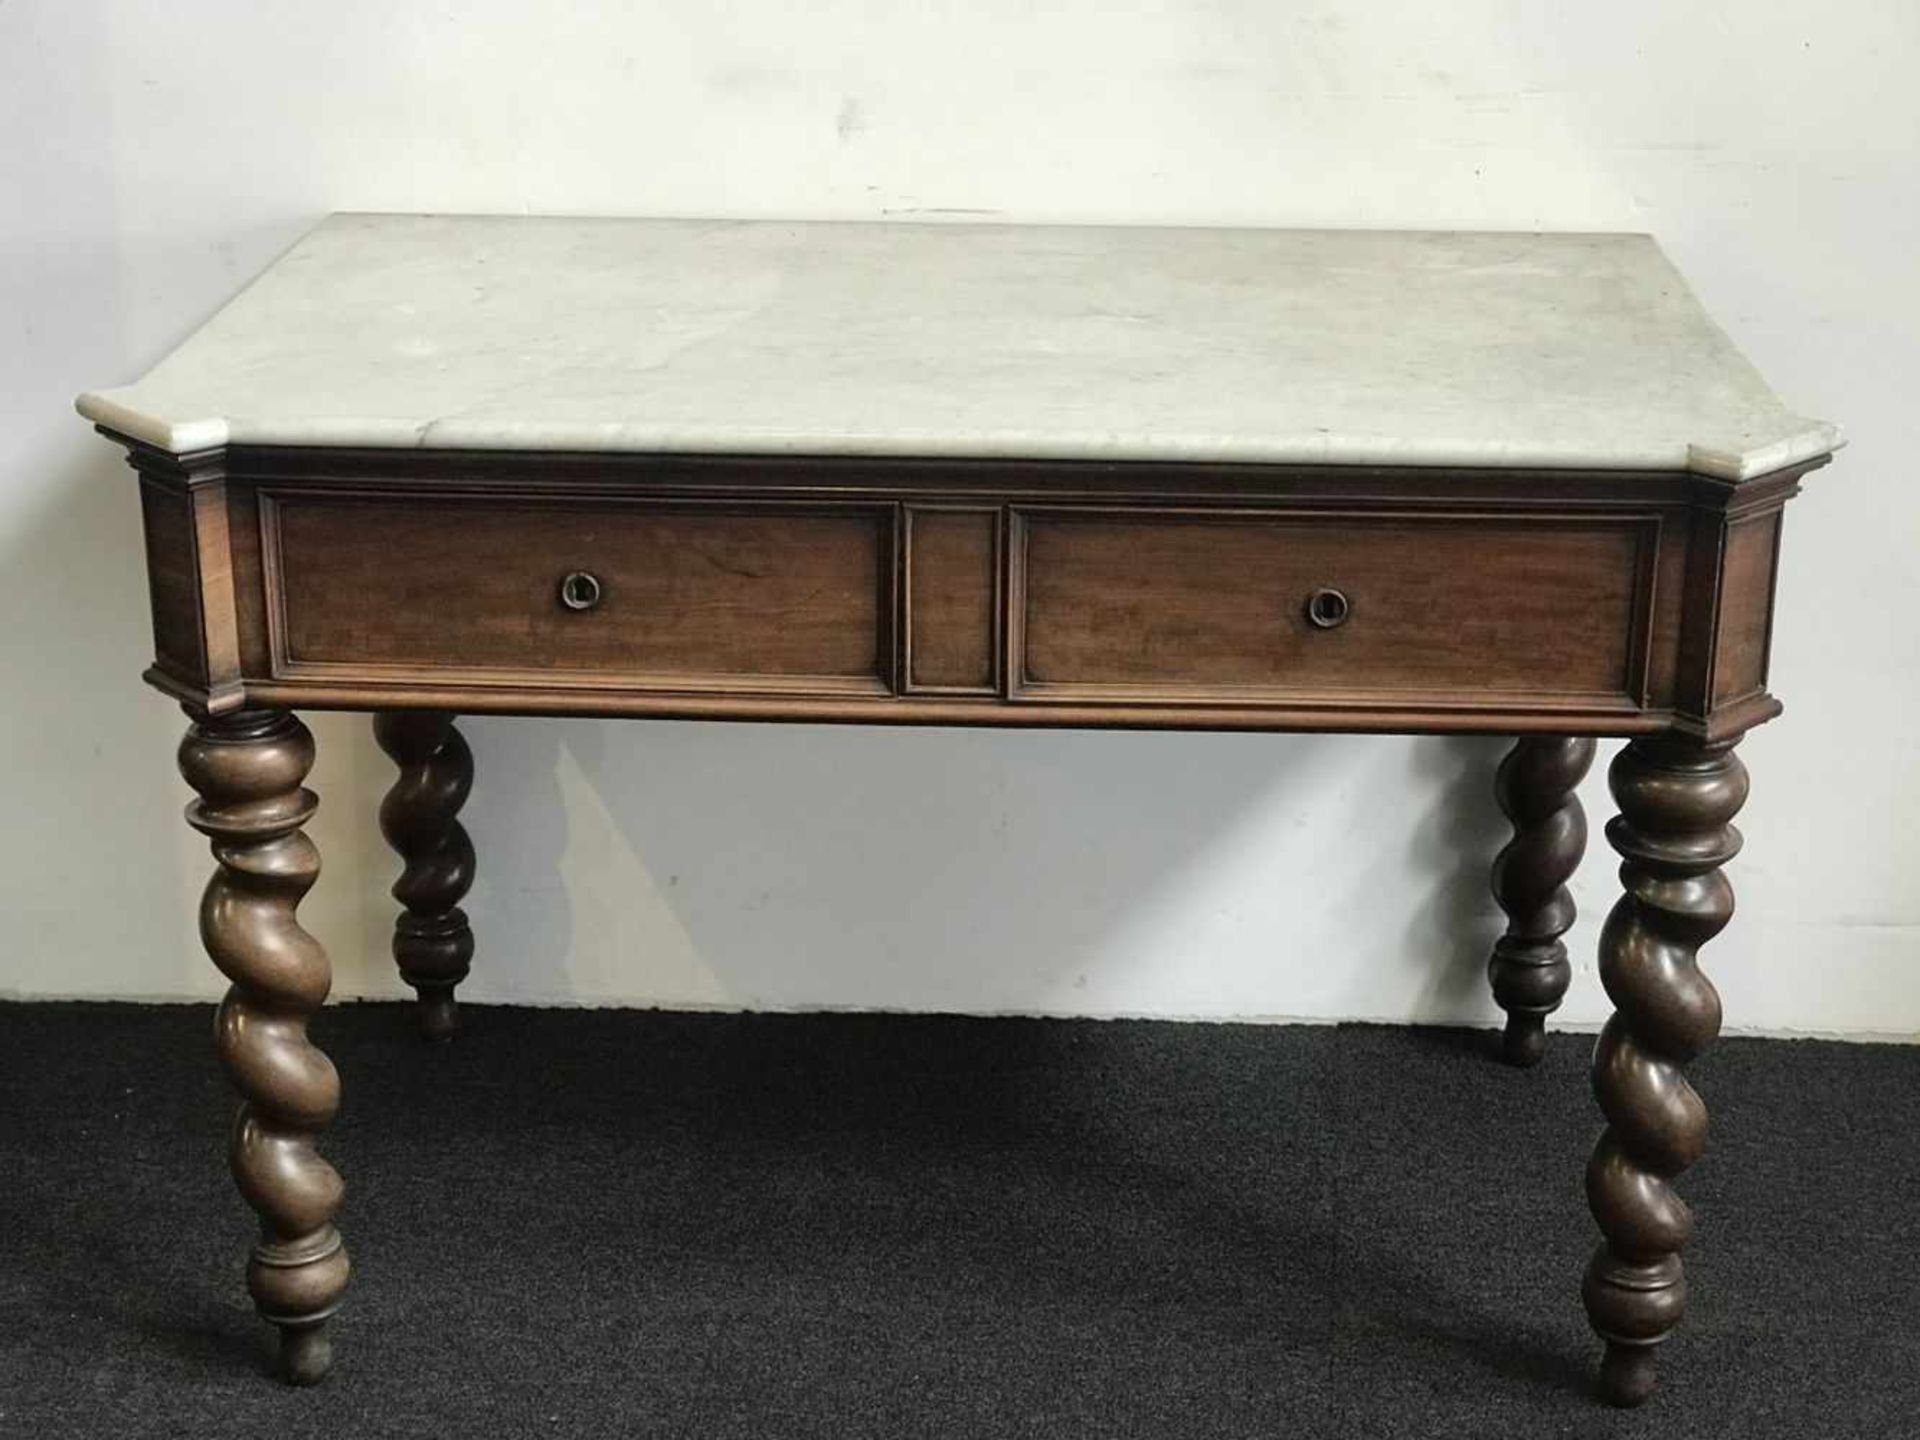 Table with twisted legs marble top H 81 afm 76 x 126